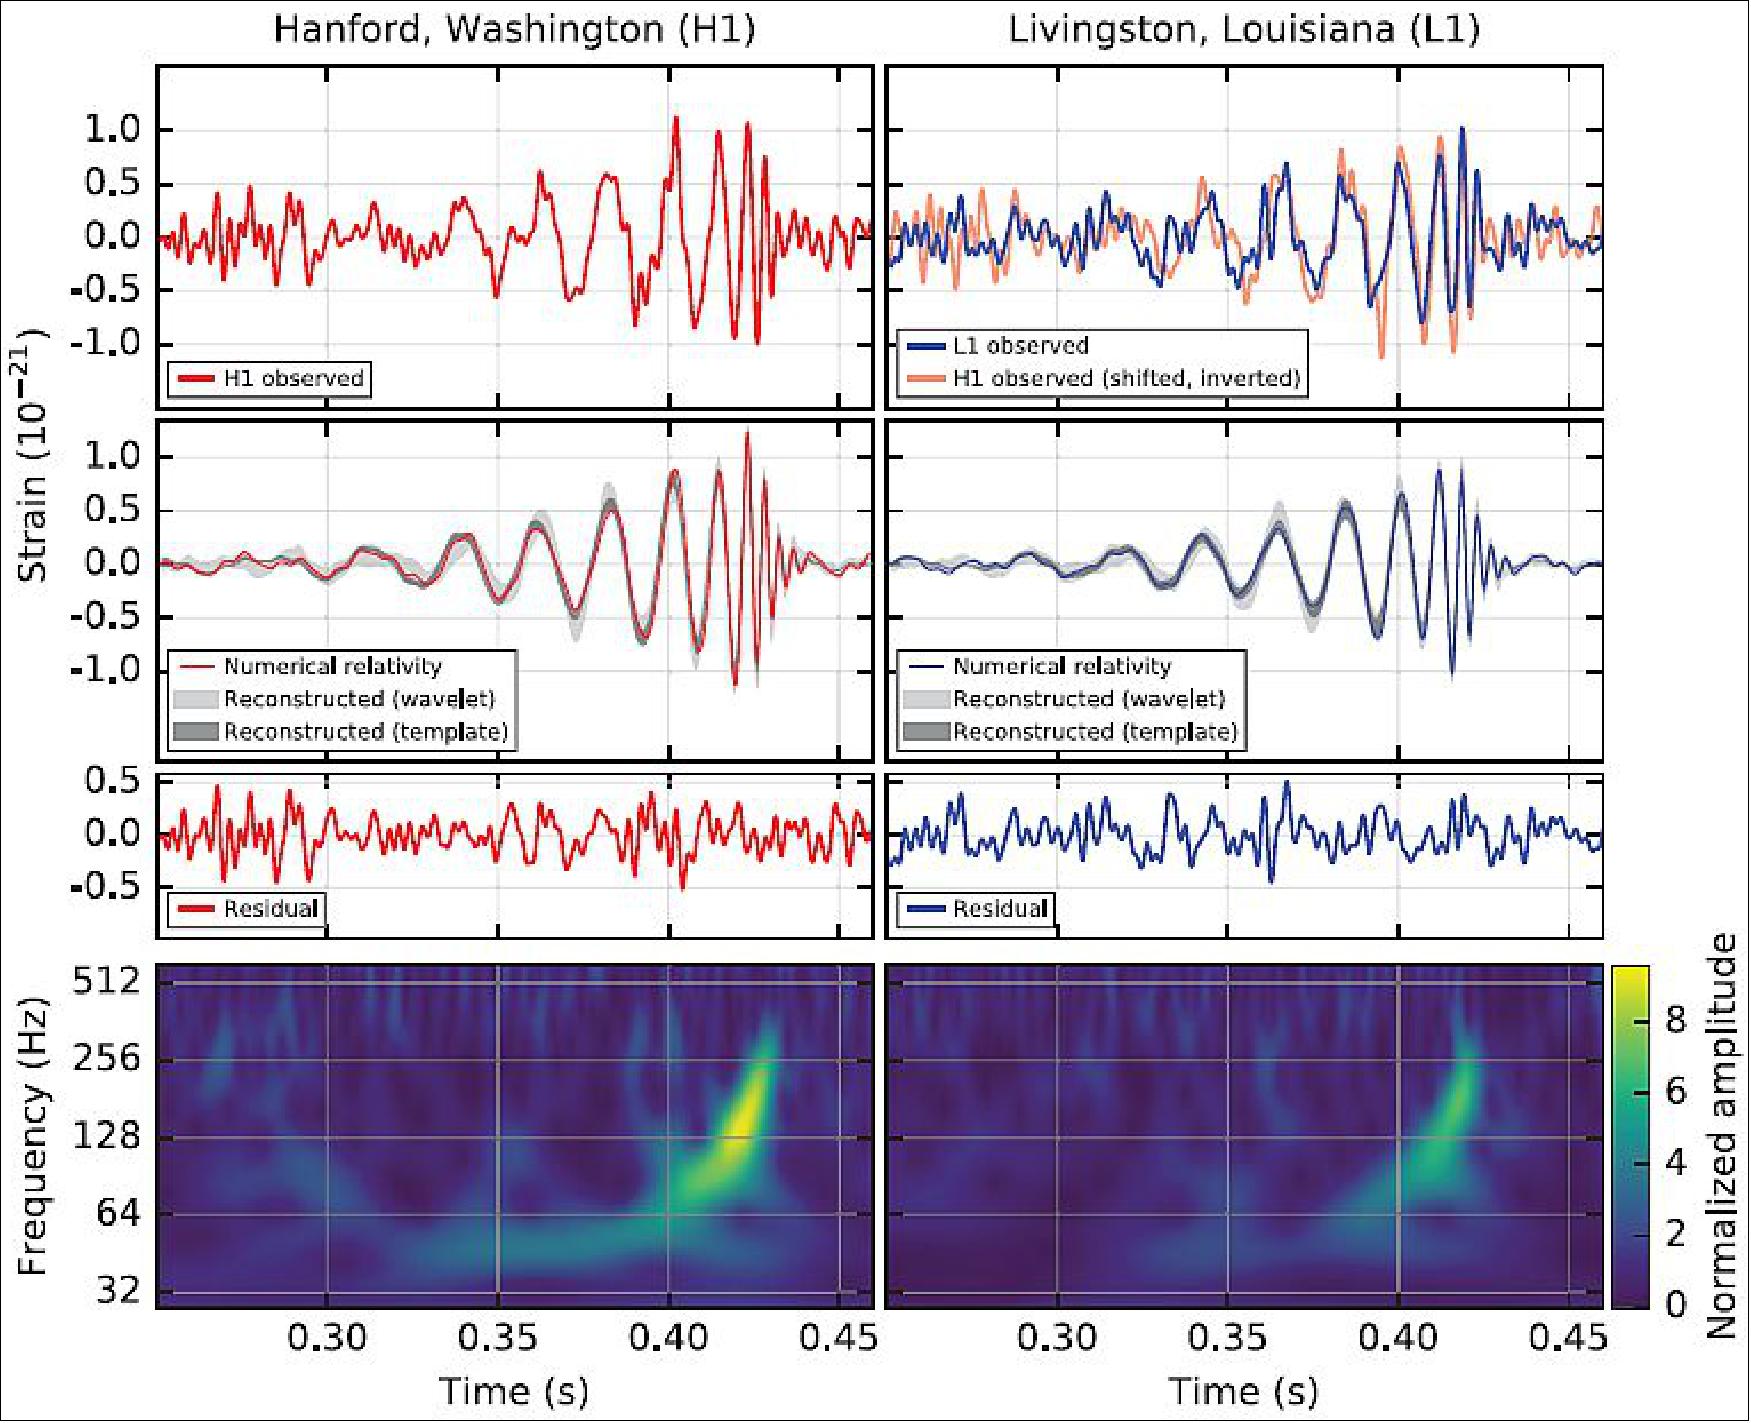 Figure 39: The gravitational-wave event GW150914 observed by the LIGO Hanford (H1, left column panels) and Livingston (L1, right column panels) detectors. Times are shown relative to September 14, 2015 at 09:50:45 UTC (image credit: LIGO consortium).